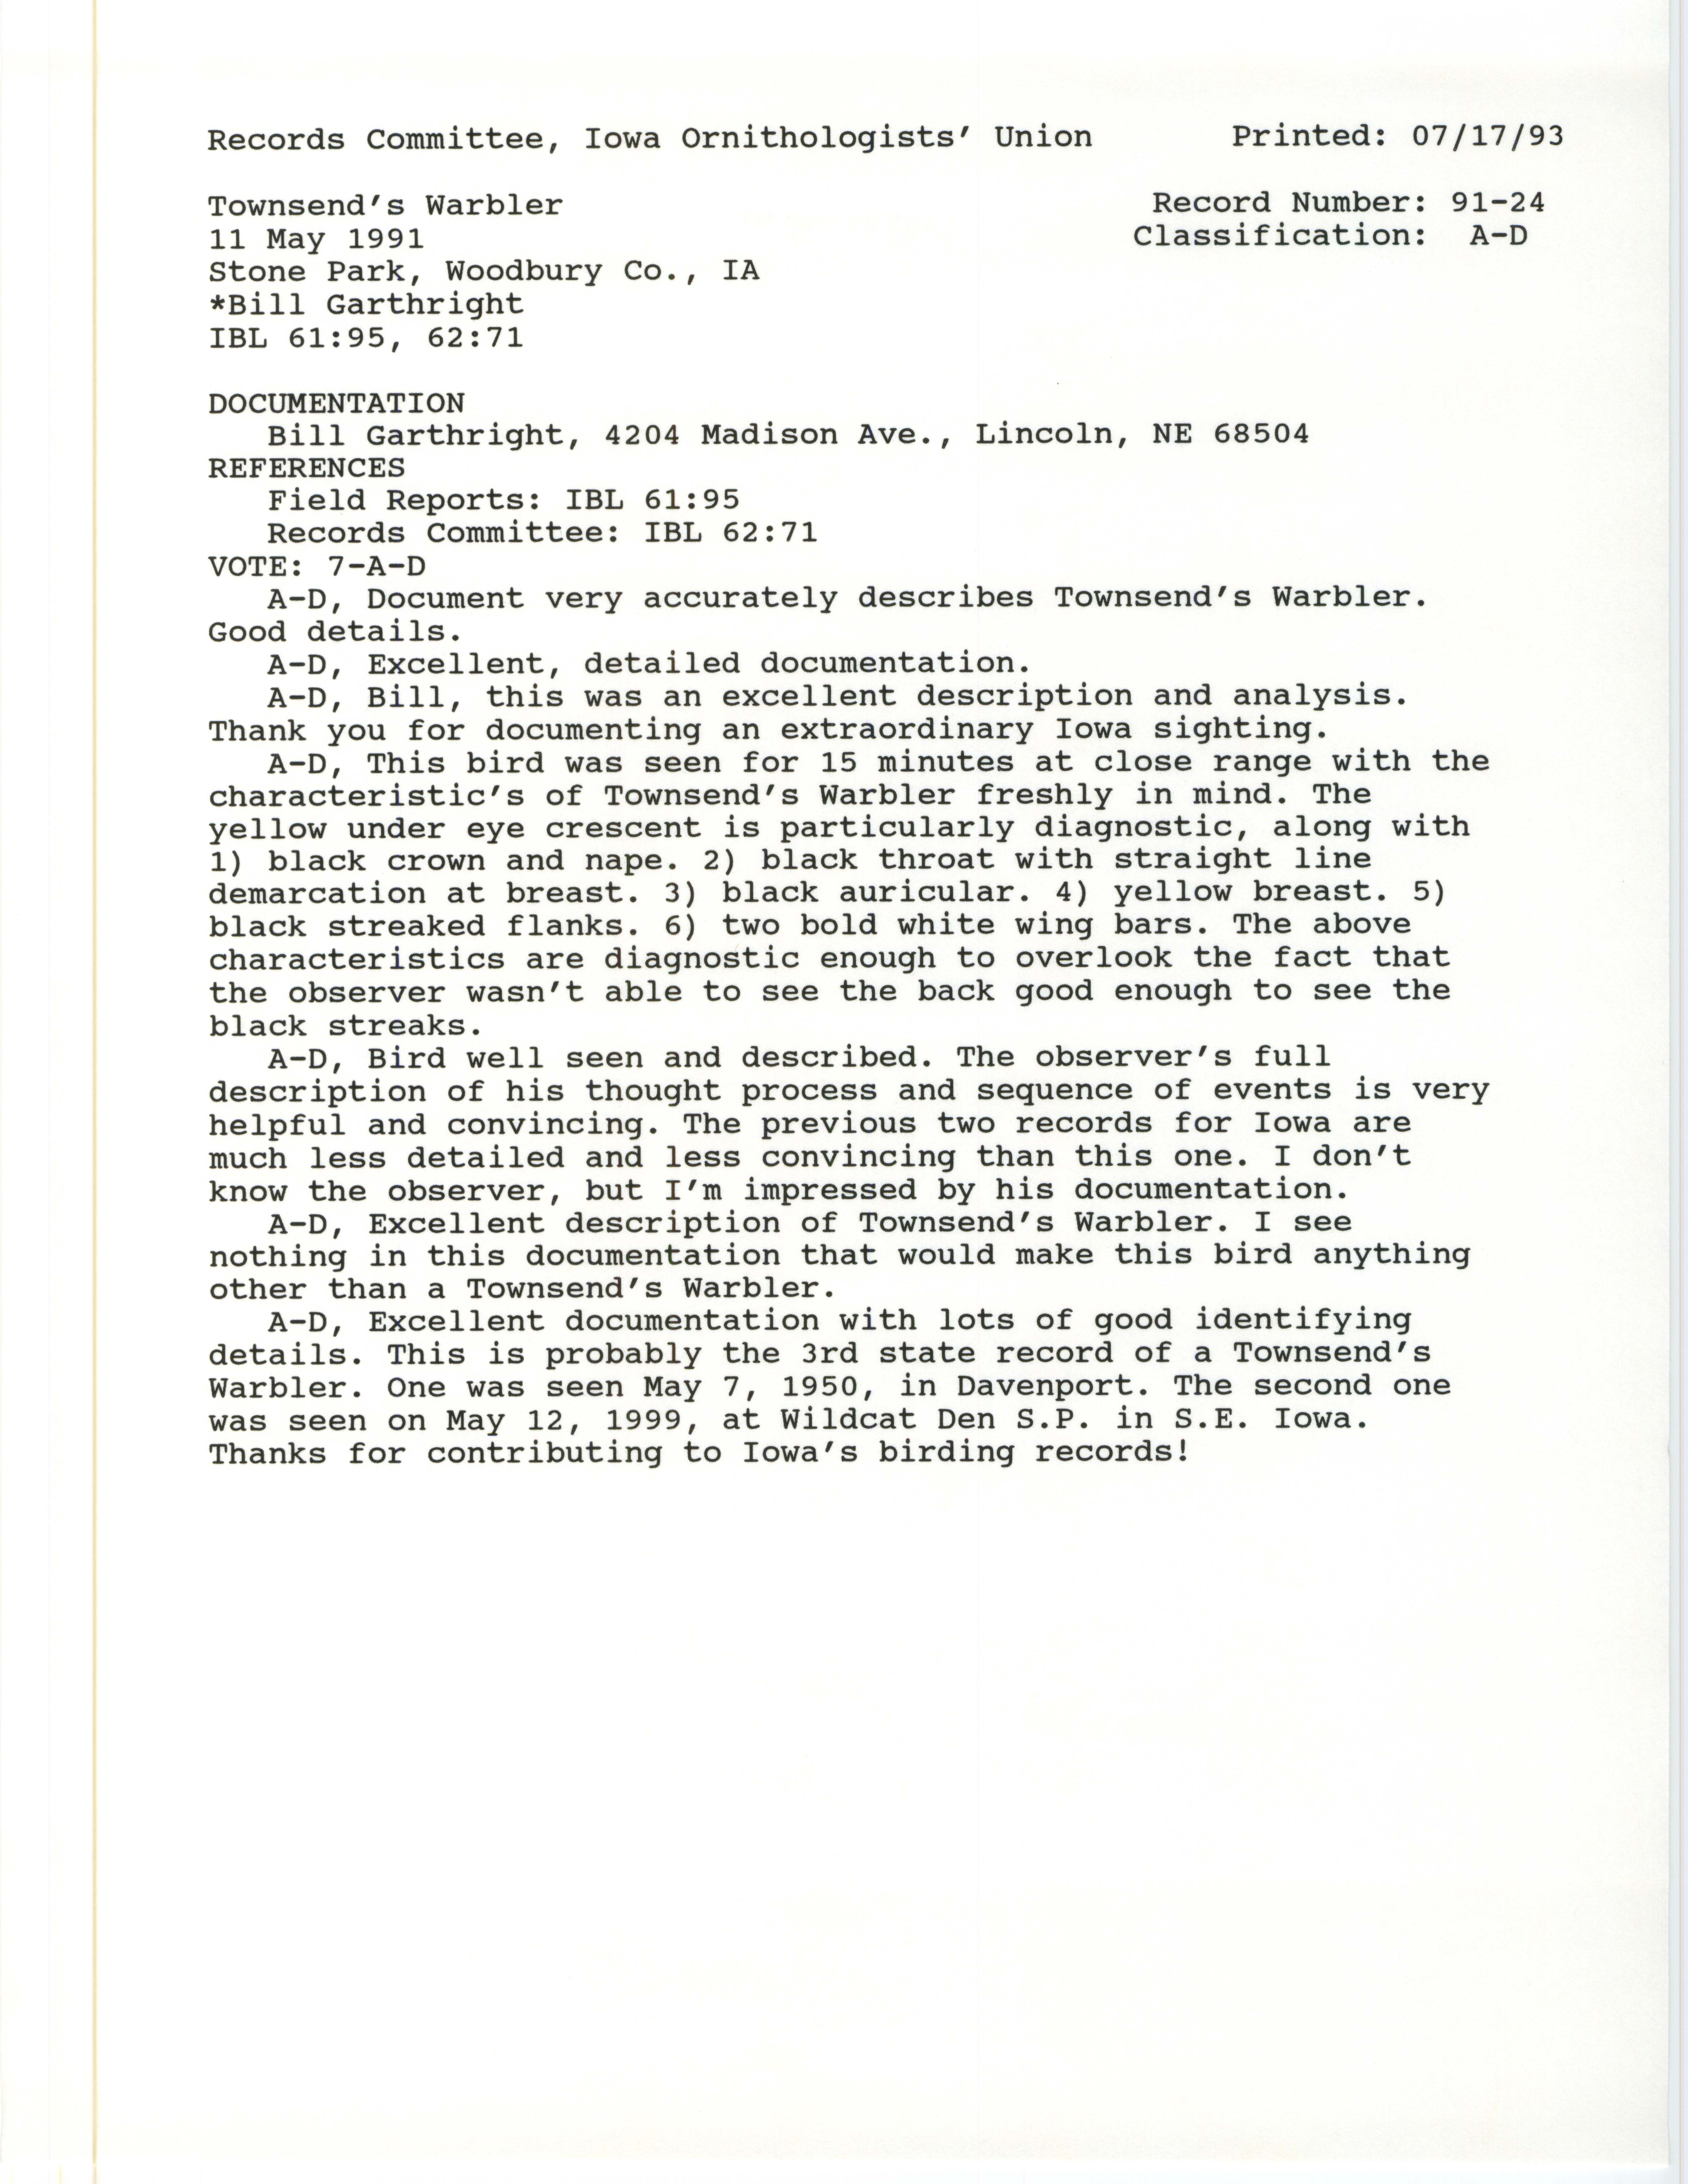 Records Committee review for rare bird sighting for Townsend's Warbler at Stone State Park, 1991